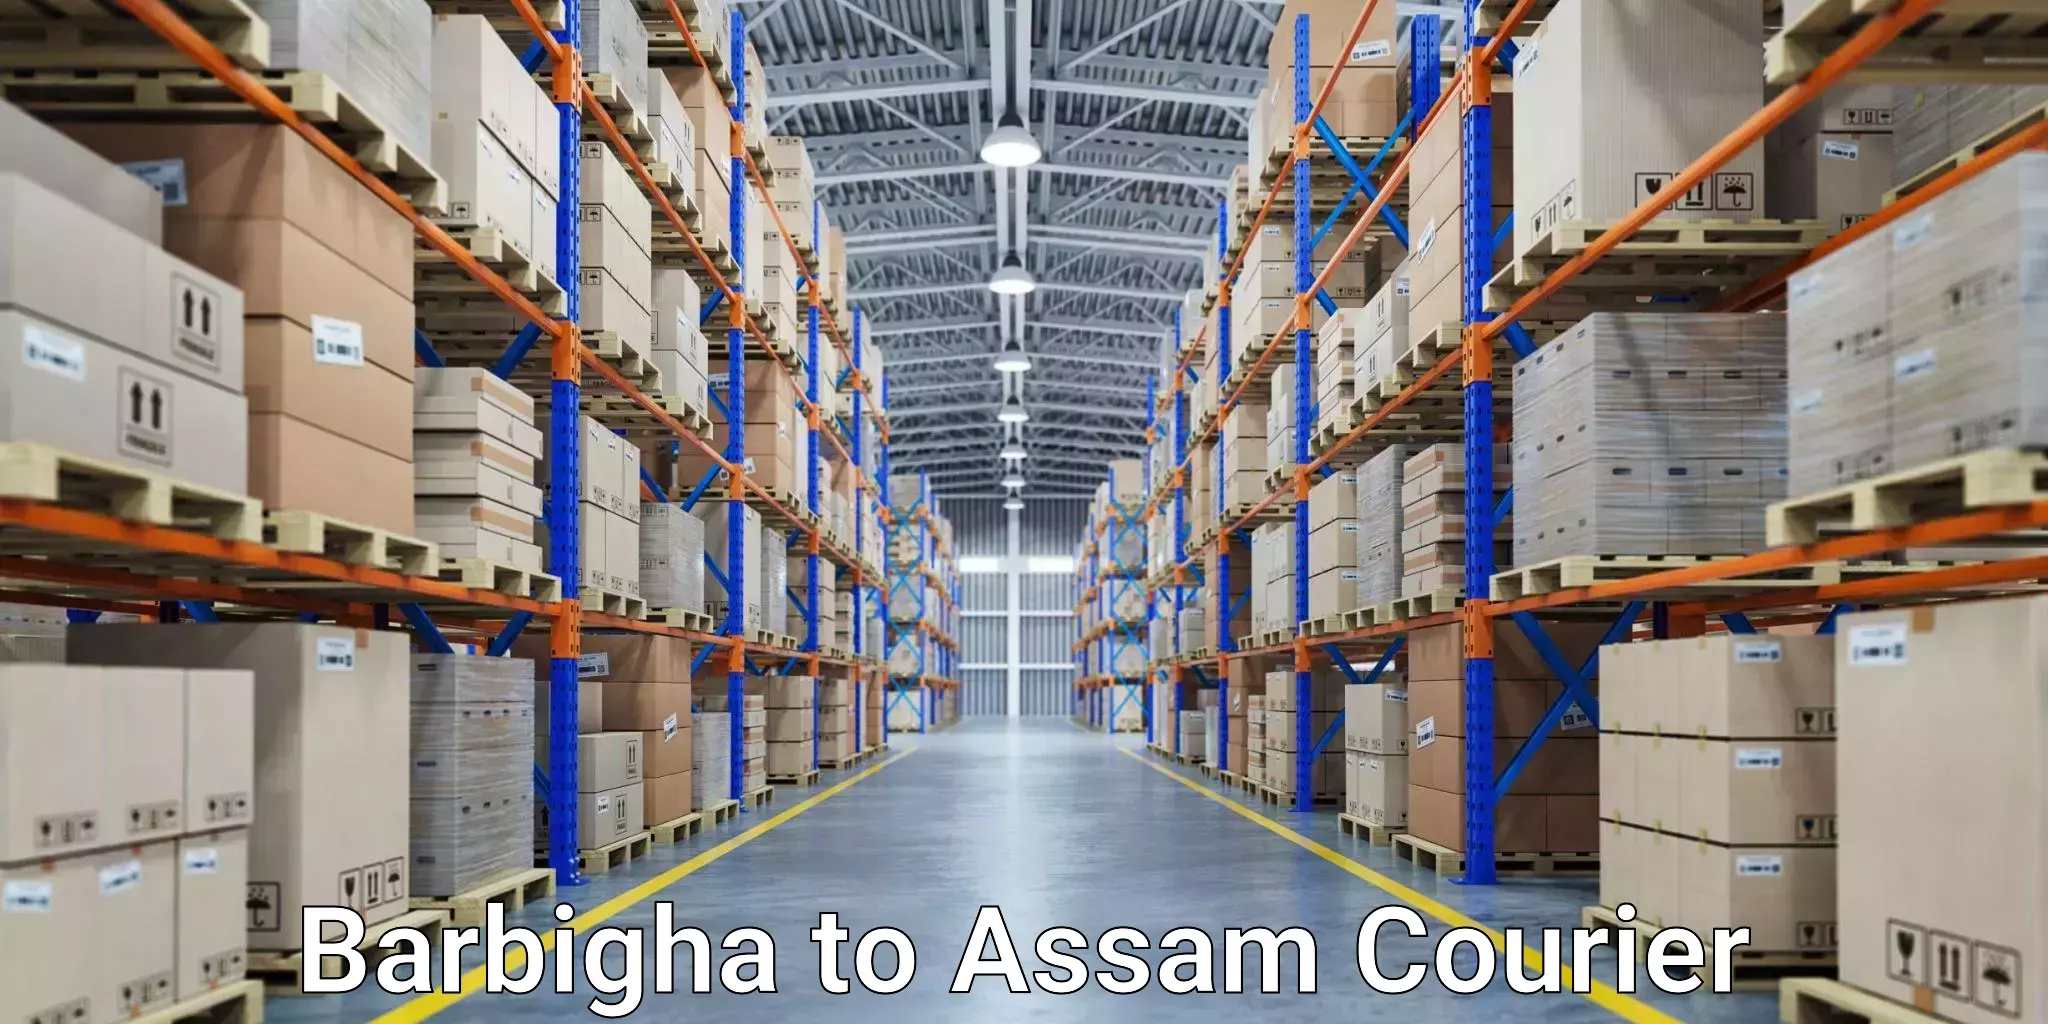 Express delivery capabilities in Barbigha to Jorhat